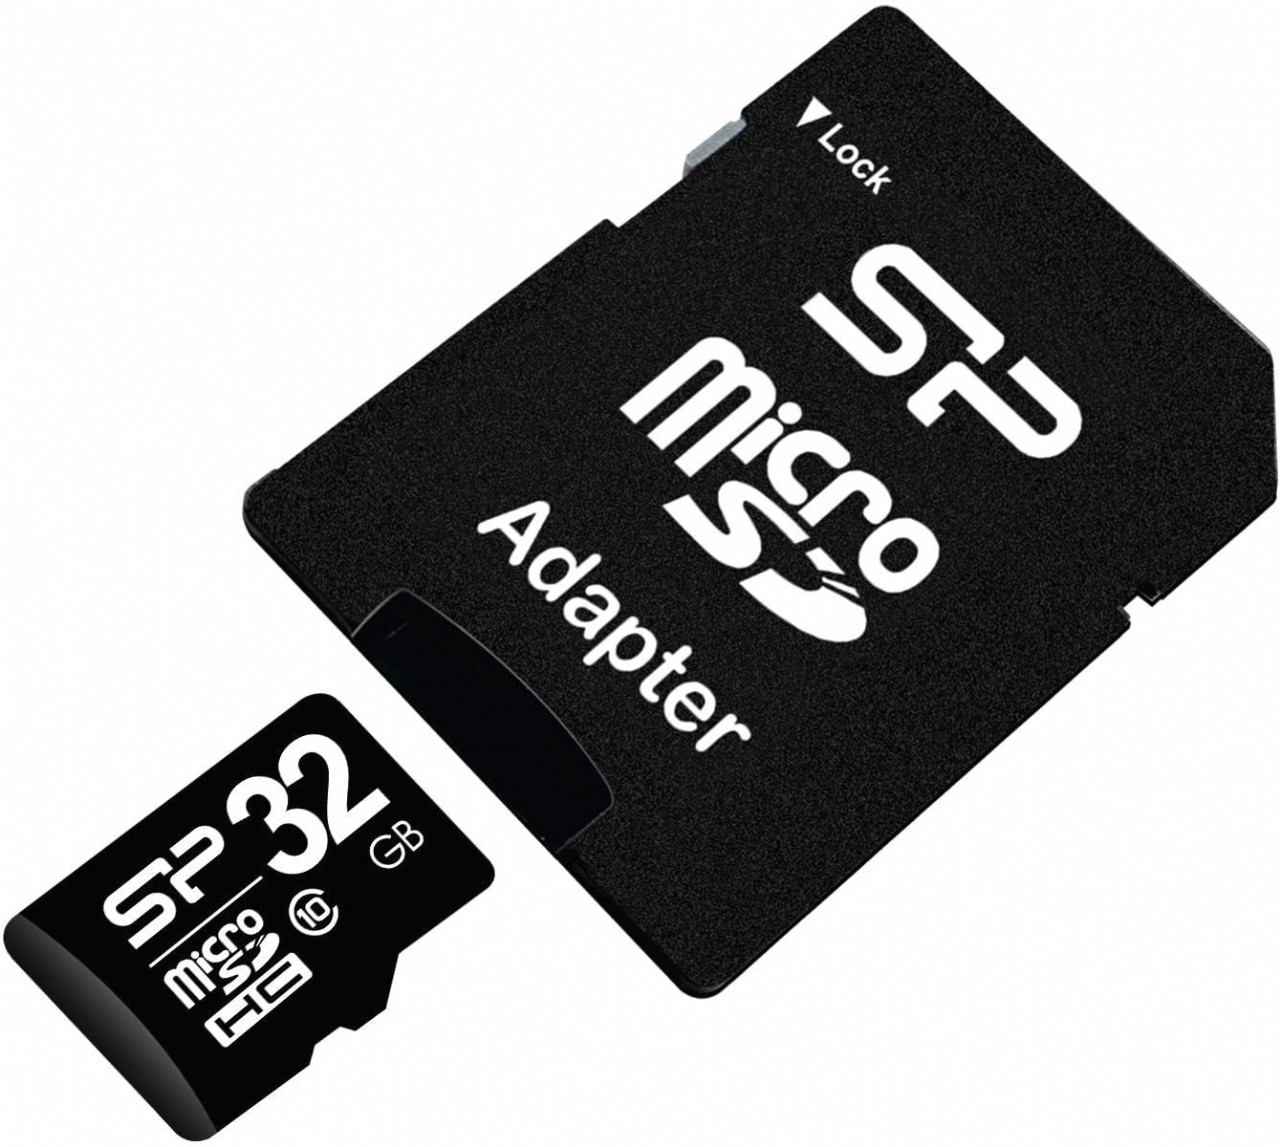 Silicon Power 32GB microSD Memory Card SDHC Class 10 w/ SD Adapter 40MB/sec